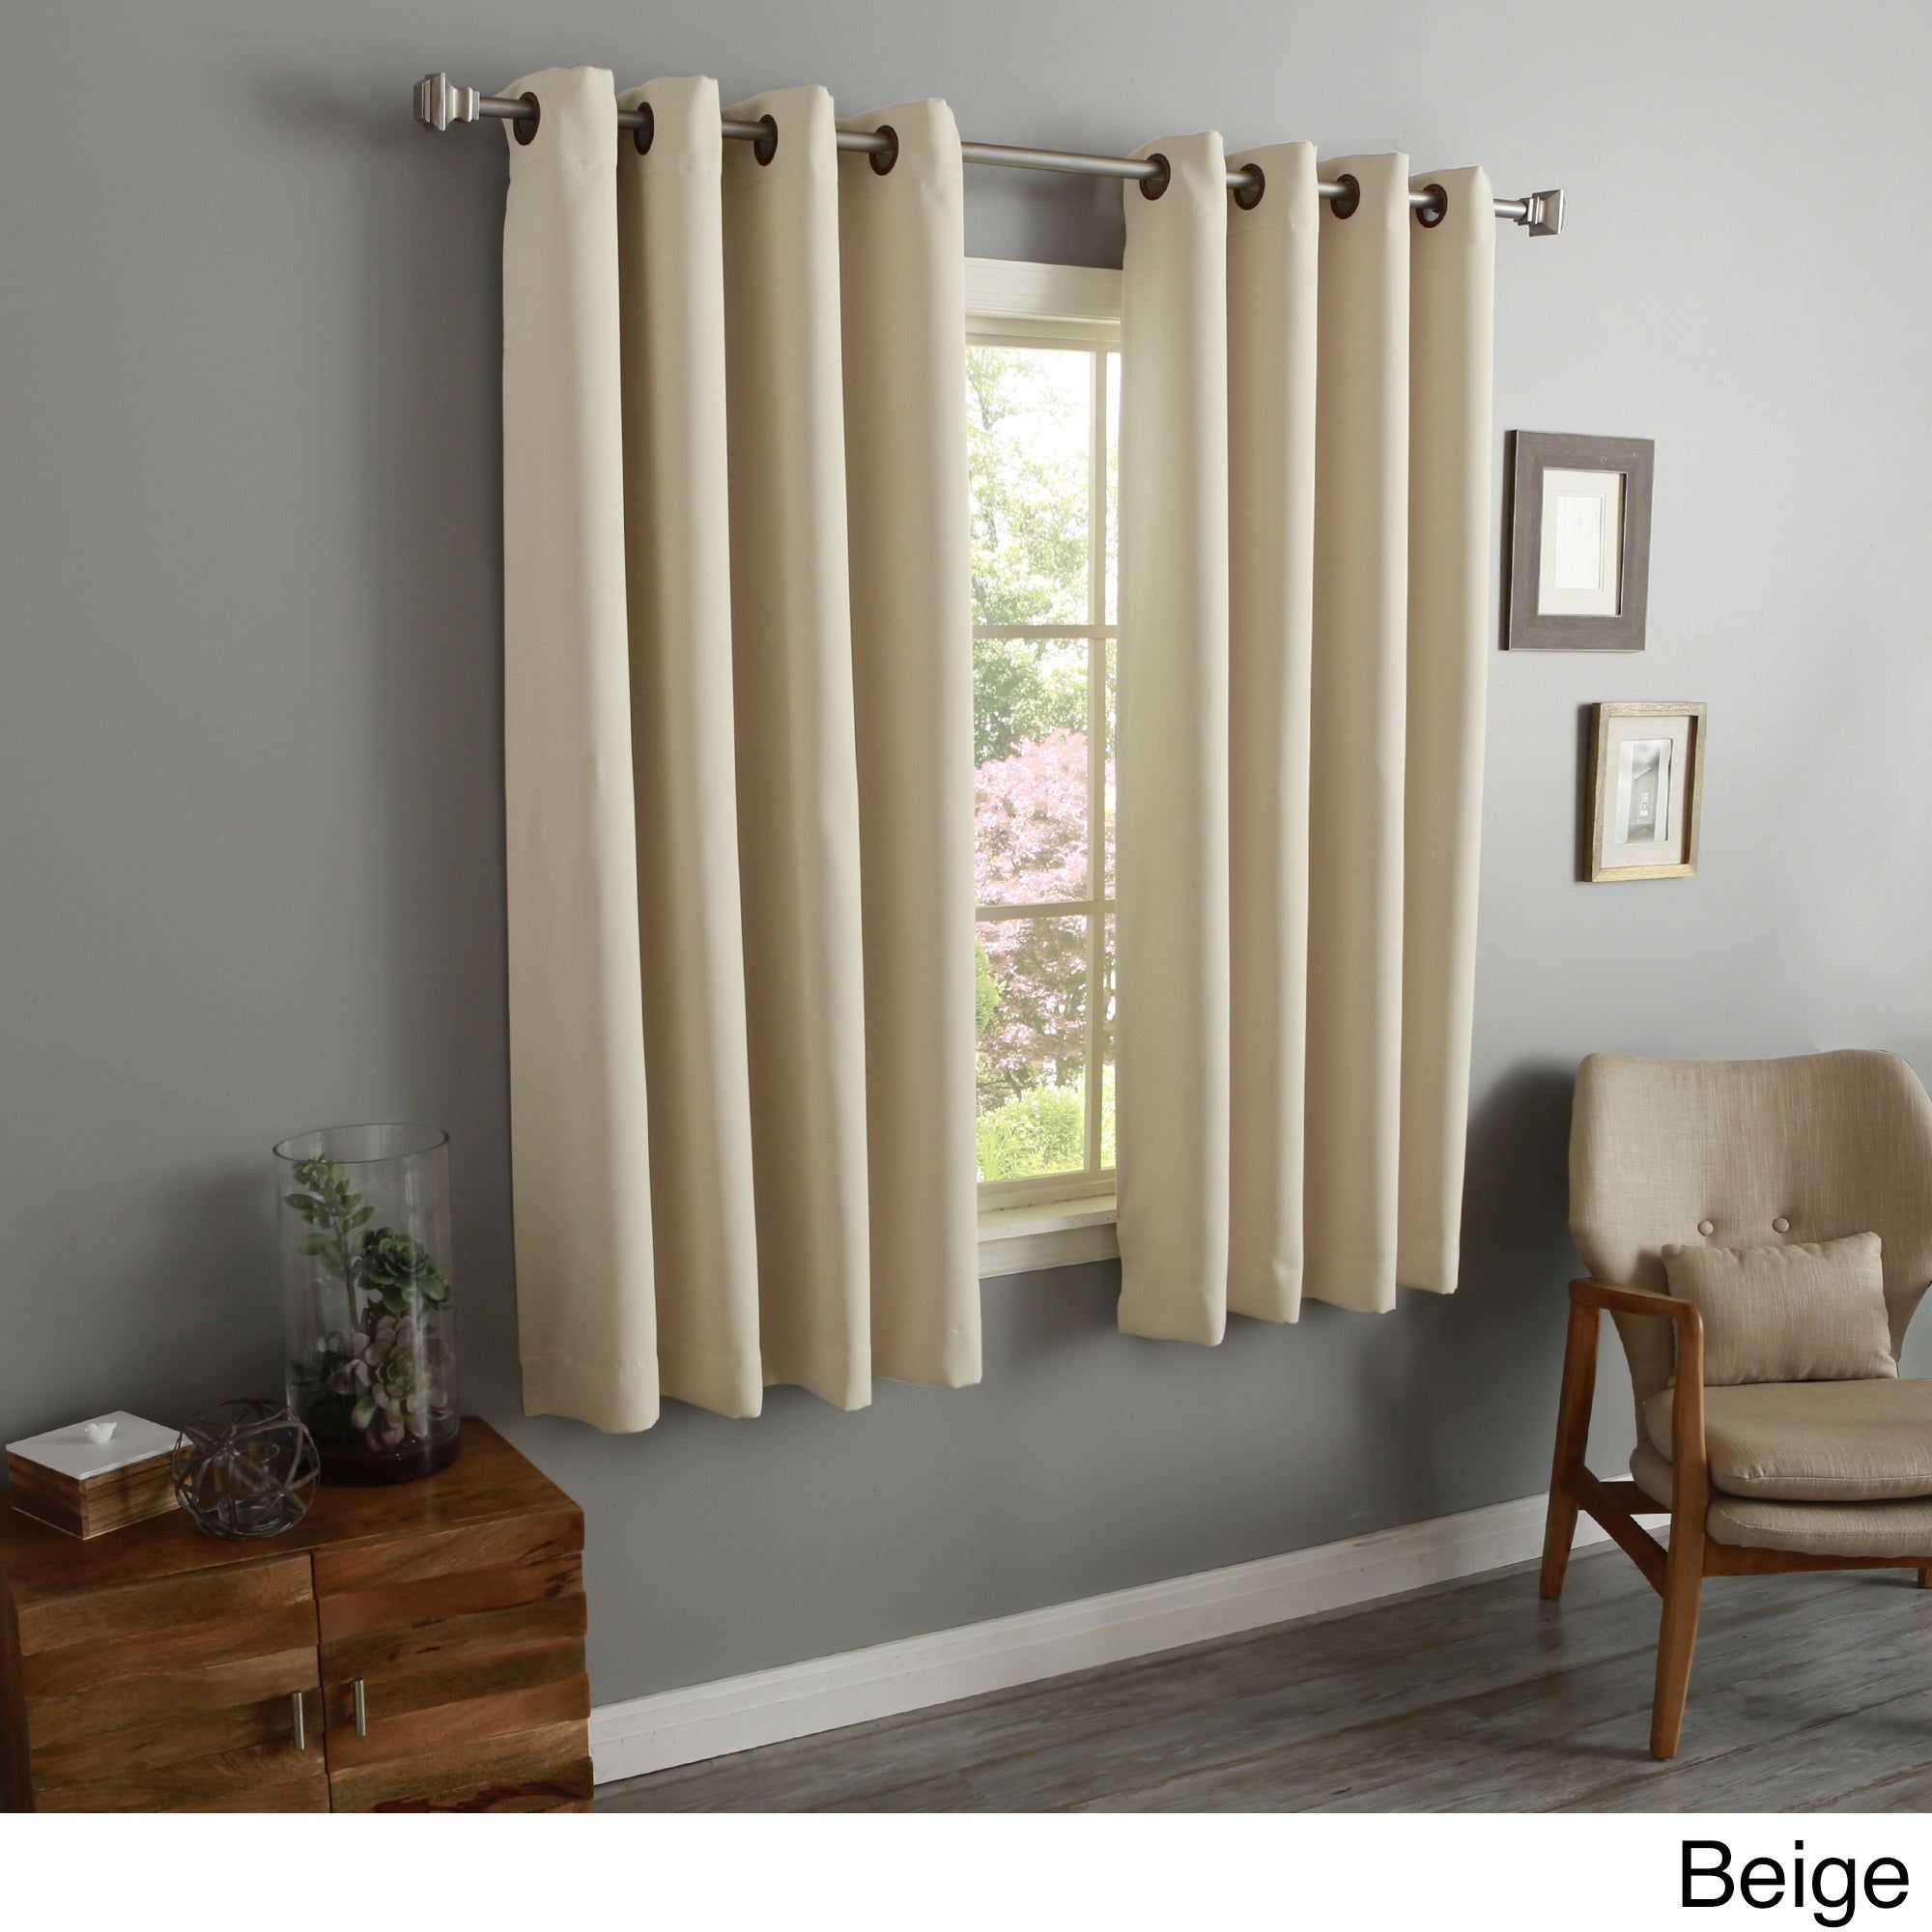 Aurora Home 54 Inch Thermal Insulated Blackout Grommet Top Curtain Panel  Pair – 52"w X 54"l Each Intended For Thermal Insulated Blackout Grommet Top Curtain Panel Pairs (View 6 of 30)